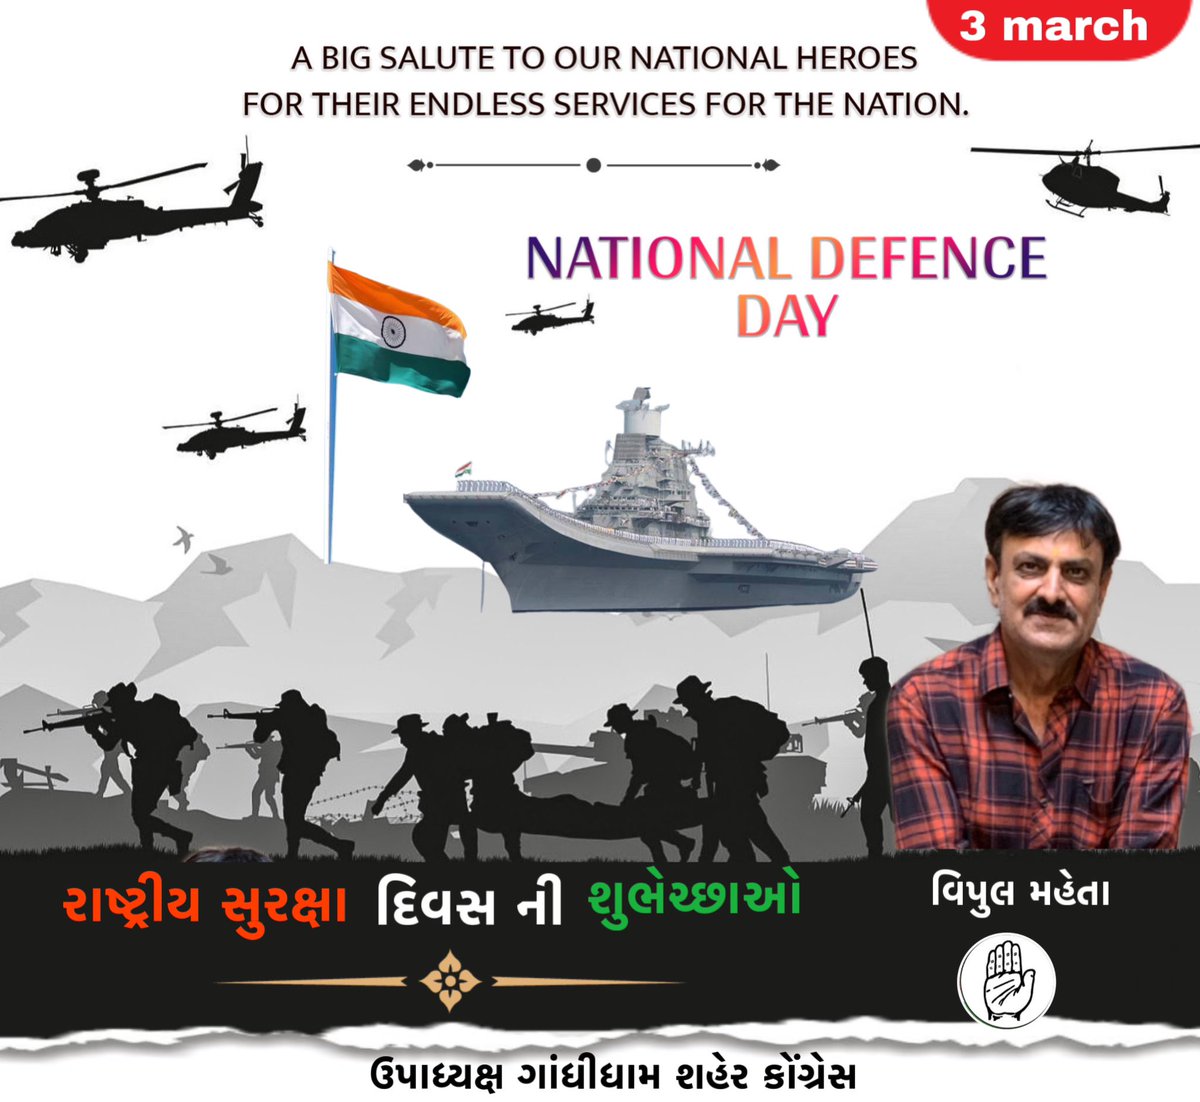 “Take a moment and Thanks to our soldiers.”
National Defence Day 💂🏻‍♂️⚔️
.
#nationaldefenceday #defenceday #soldiers #indianarmy #india #indiannavy #indianairforce #military #jaihind #nationaldefenceacademy